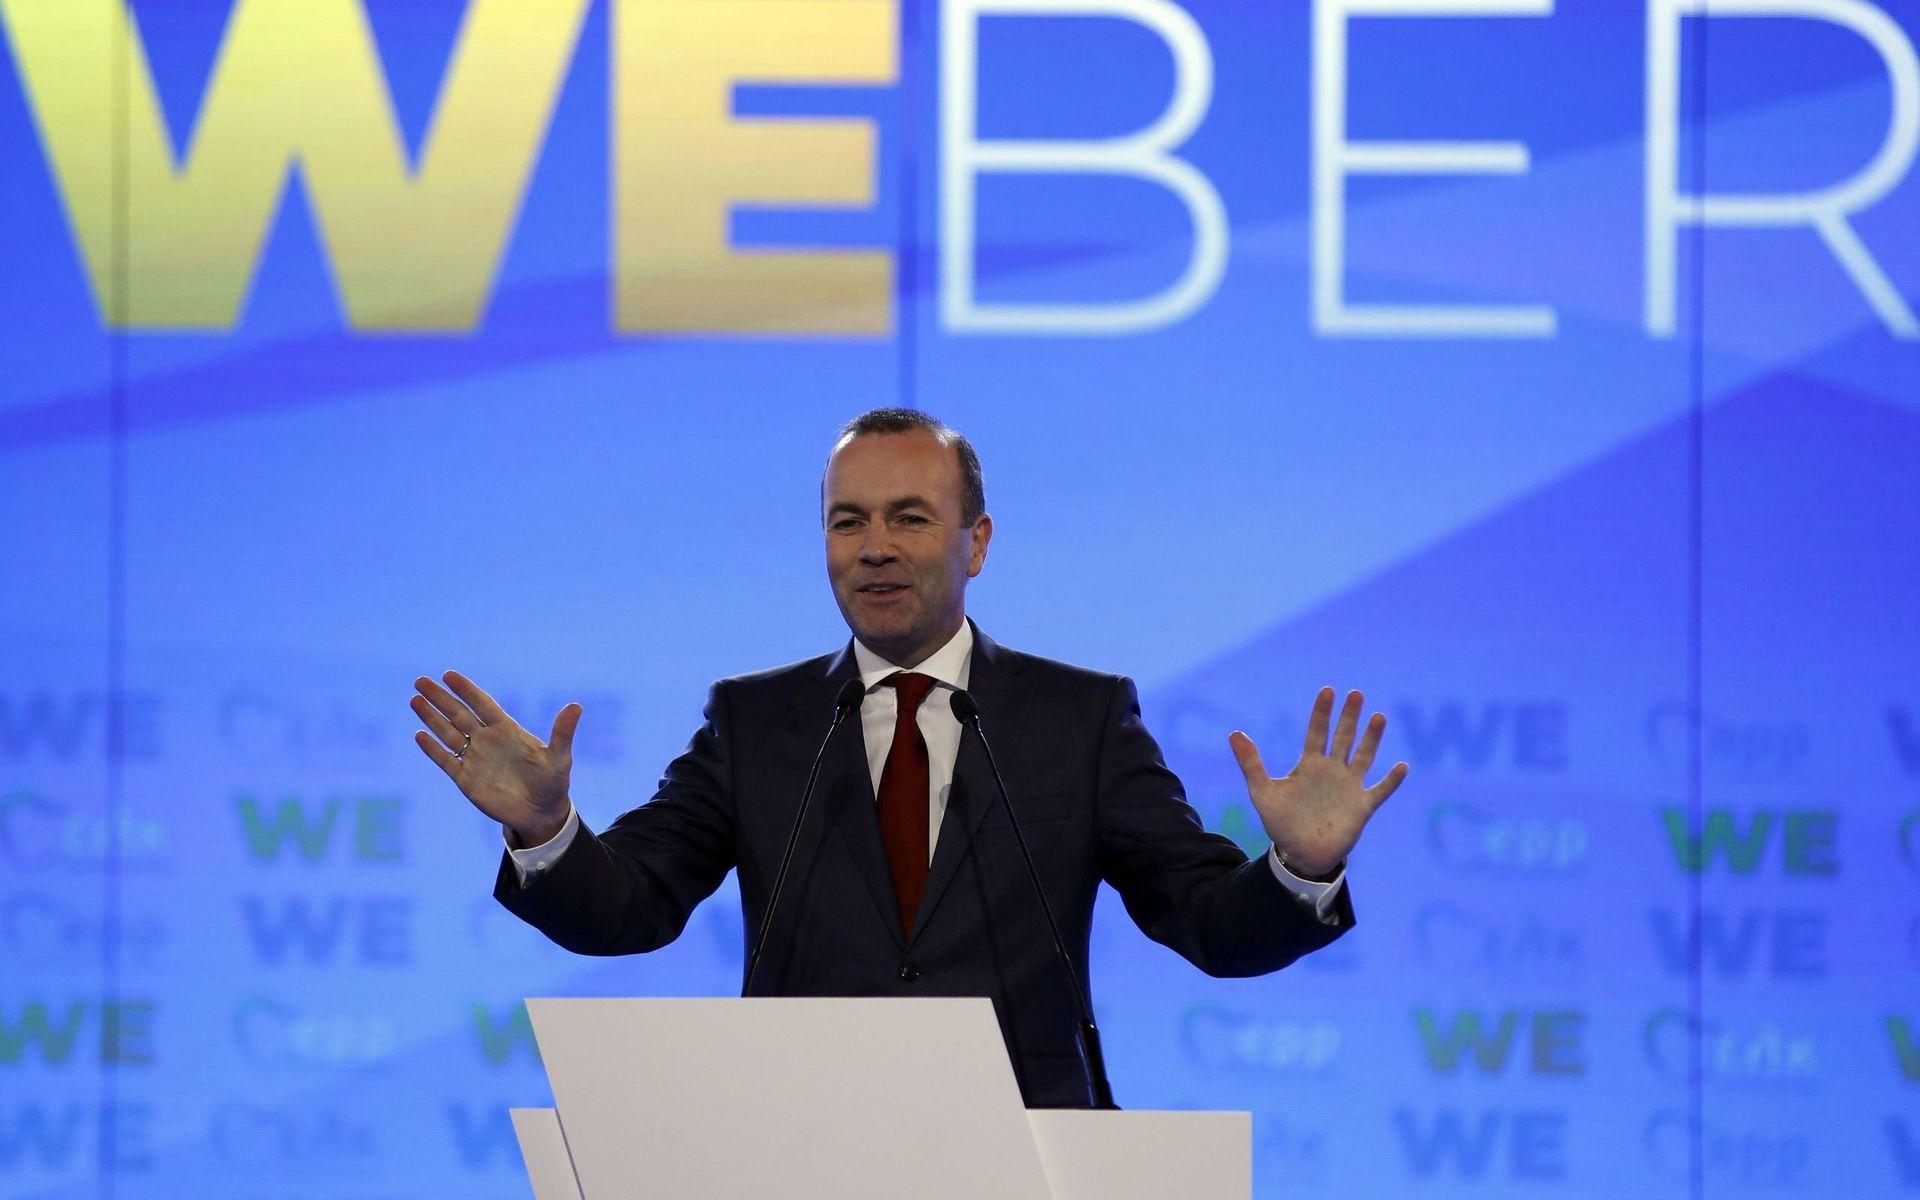 European People&apos;s Party candidate Manfred Weber delivers a speech at Zappio Congress Hall in Athens on Tuesday, April 23, 2019. Weber is in Greece for the official launch of his campaign for the May 23-26 European Parliament elections. (AP Photo/Thanassis Stavrakis)